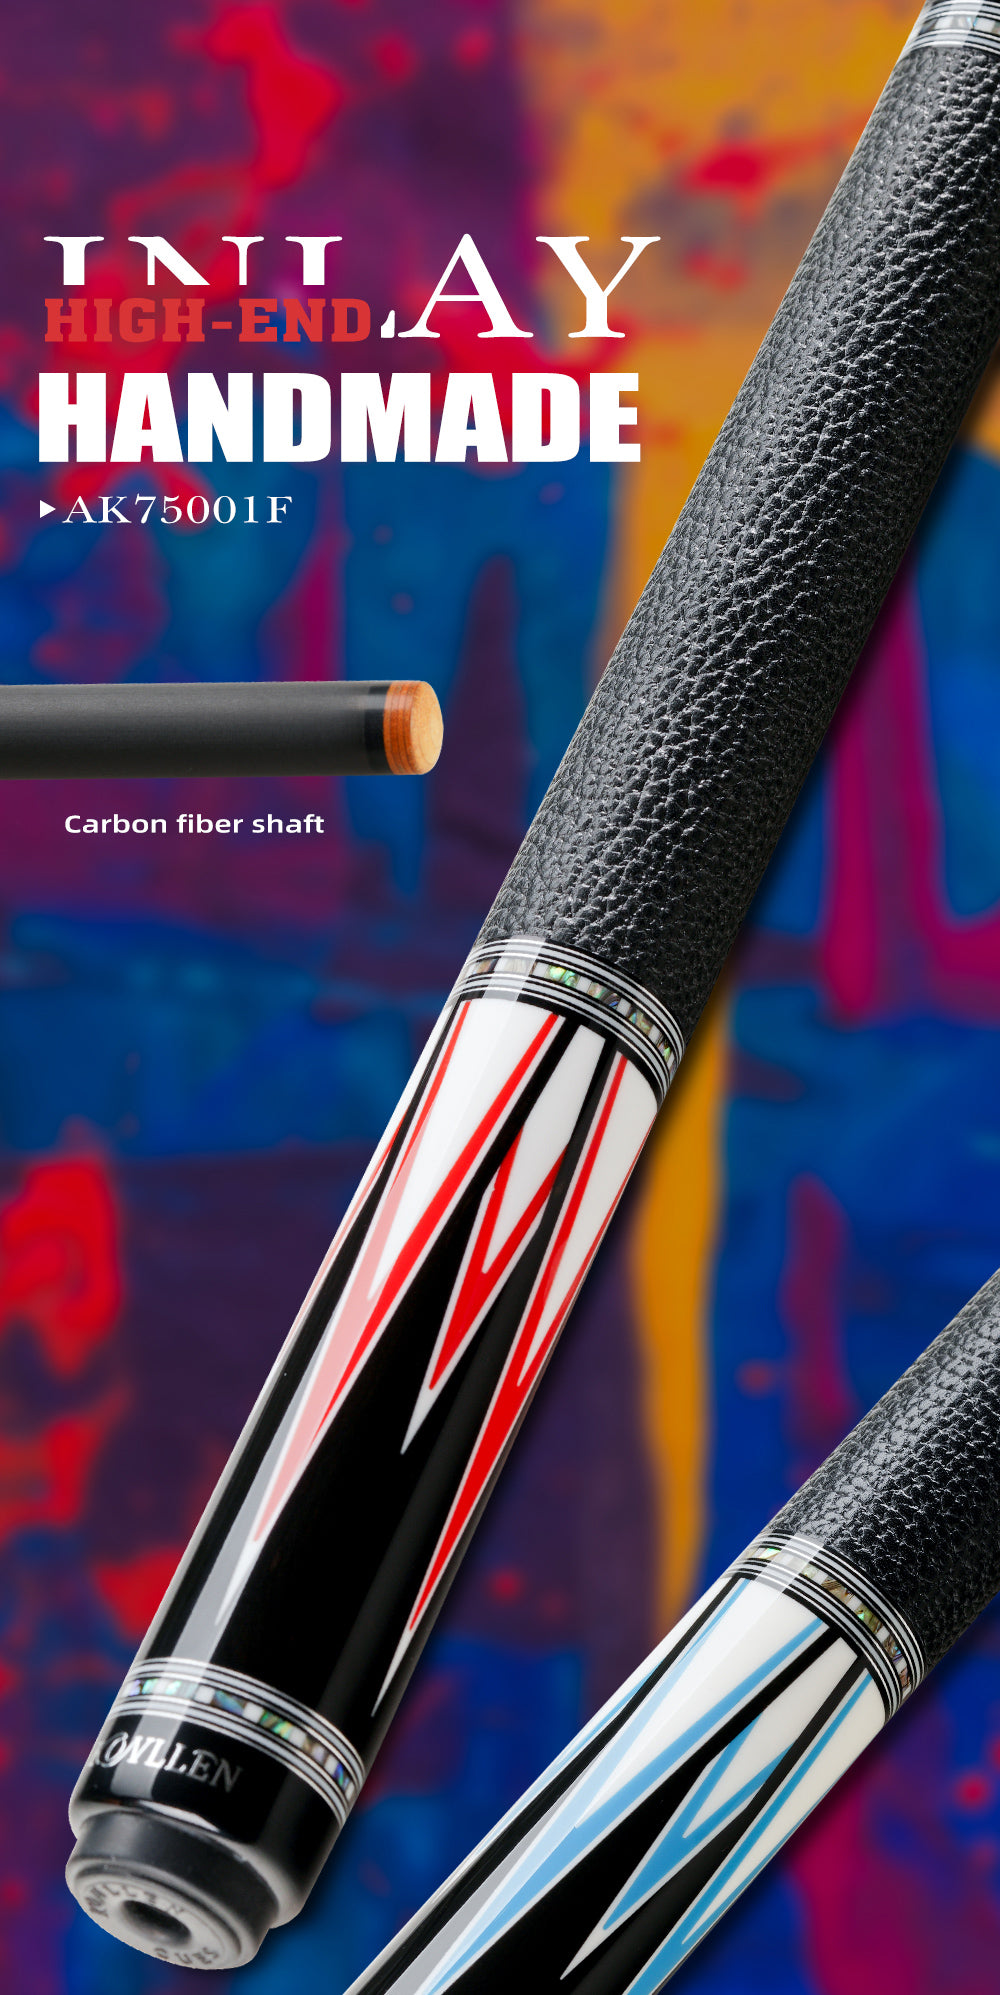 KONLLEN-Upgrade Carbon Fiber Pool Cue Stick, Real Inlay Billiard Cue, 12.5mm Tip, Low Deflection Technology, Shaft Abalone